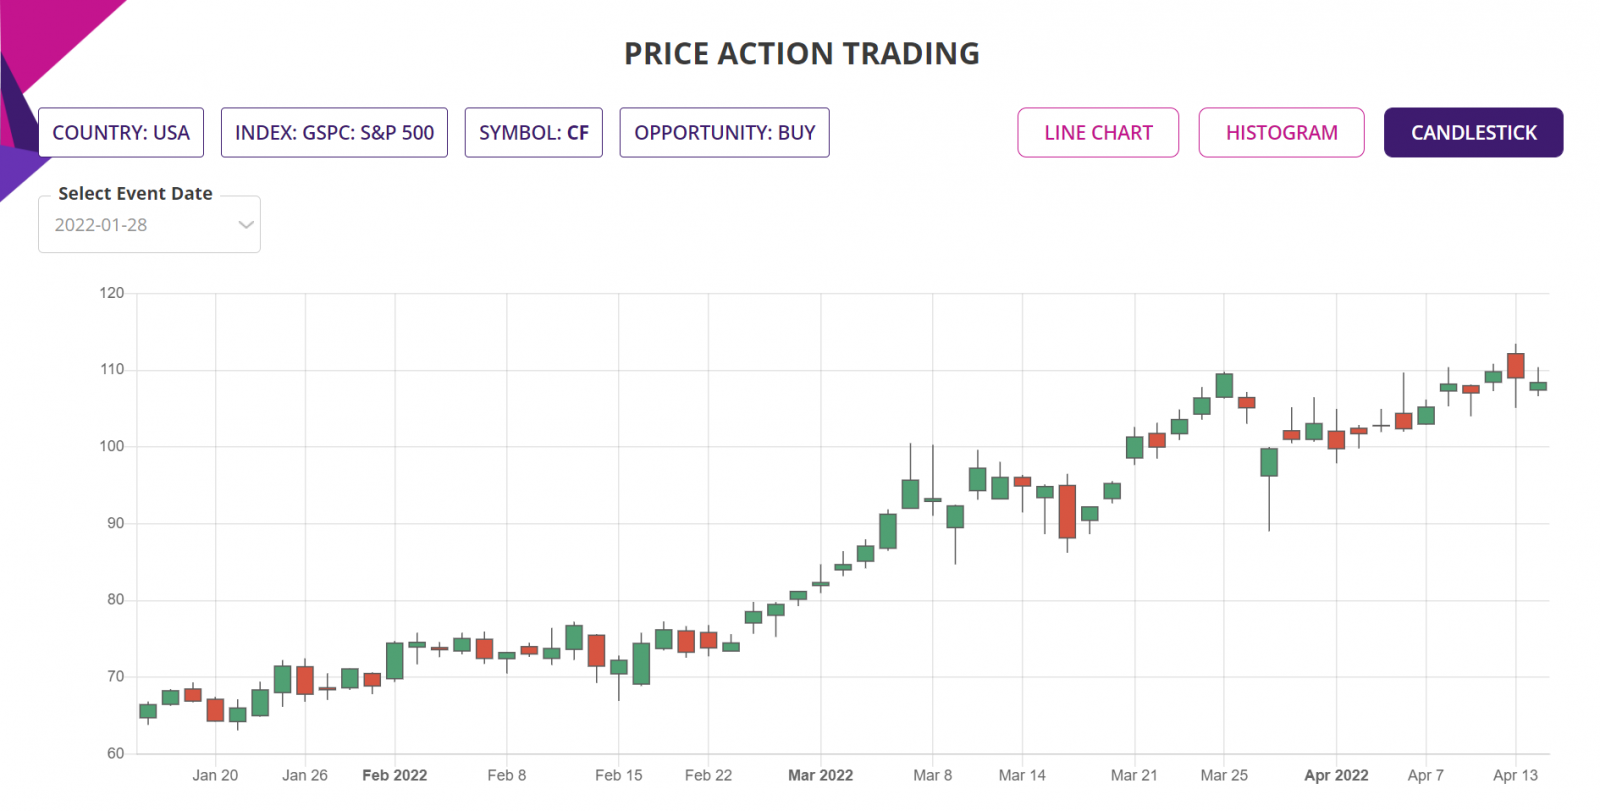 Price action trading strategy, detailed report, Candlestick chart, S&P500 Stock